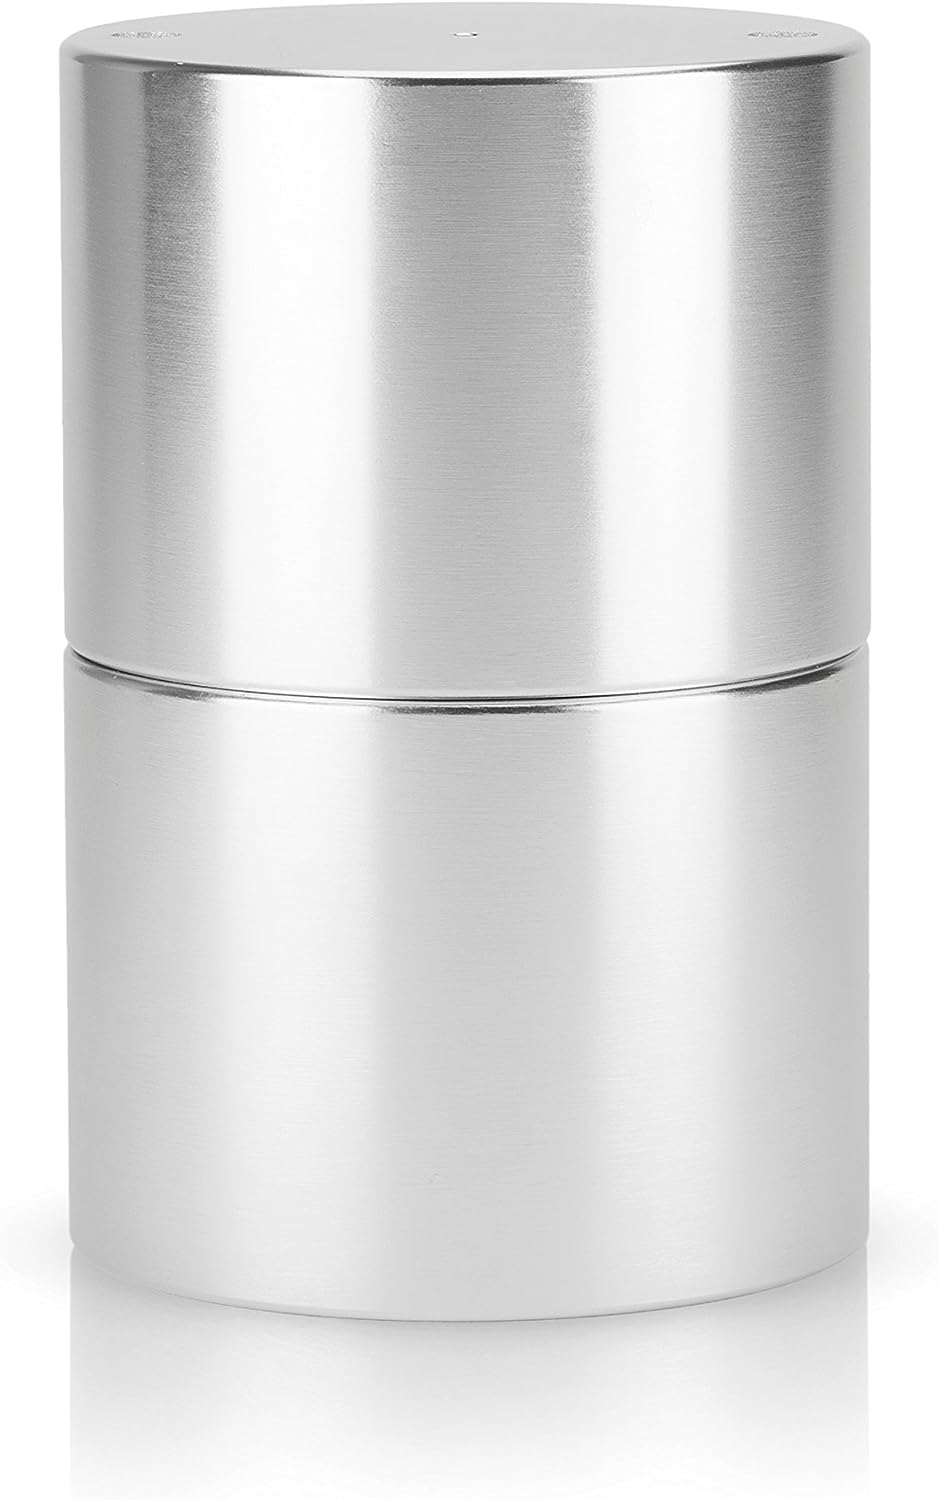 Viski Ice Ball Maker, for Perfect Scotch, Bourbon, Whiskey, Old Fashioned,  Fancy Liquor on the Rocks, Cocktail Gift, 55 mm, Aluminum